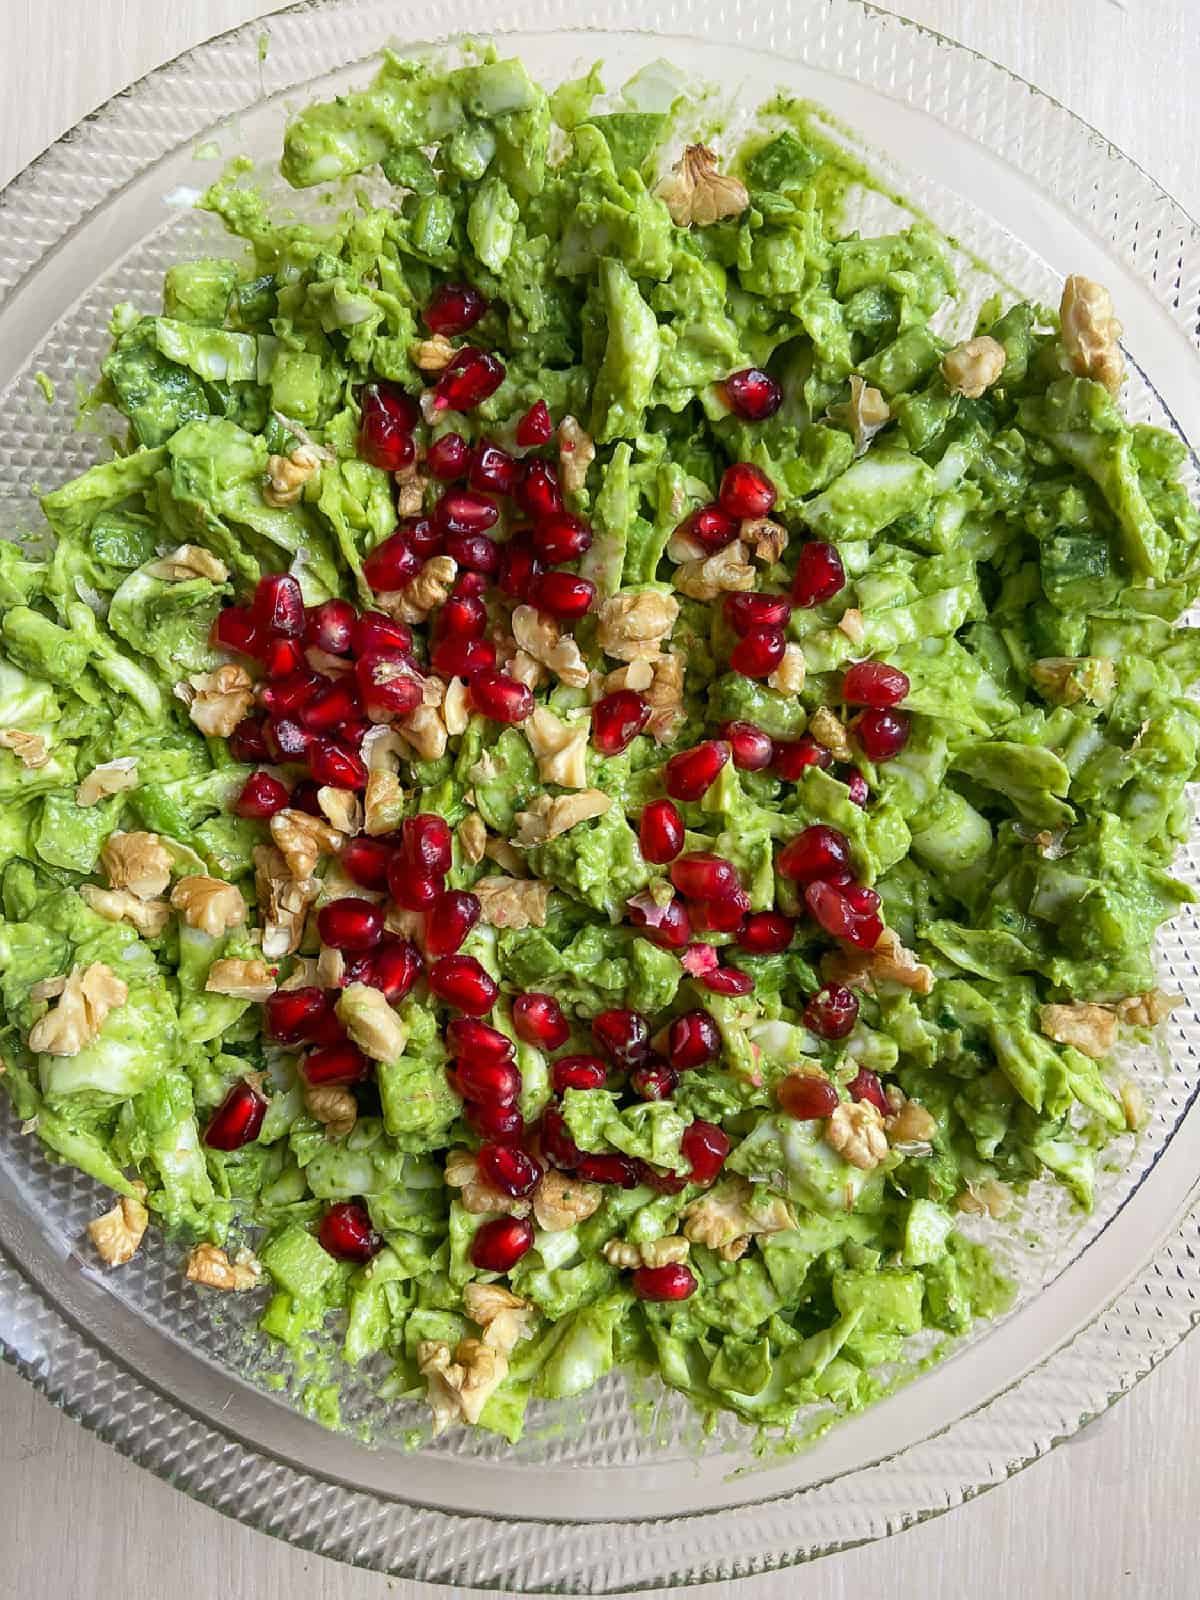 to add more color and flavor, top the salad with pomegranates and walnuts. 